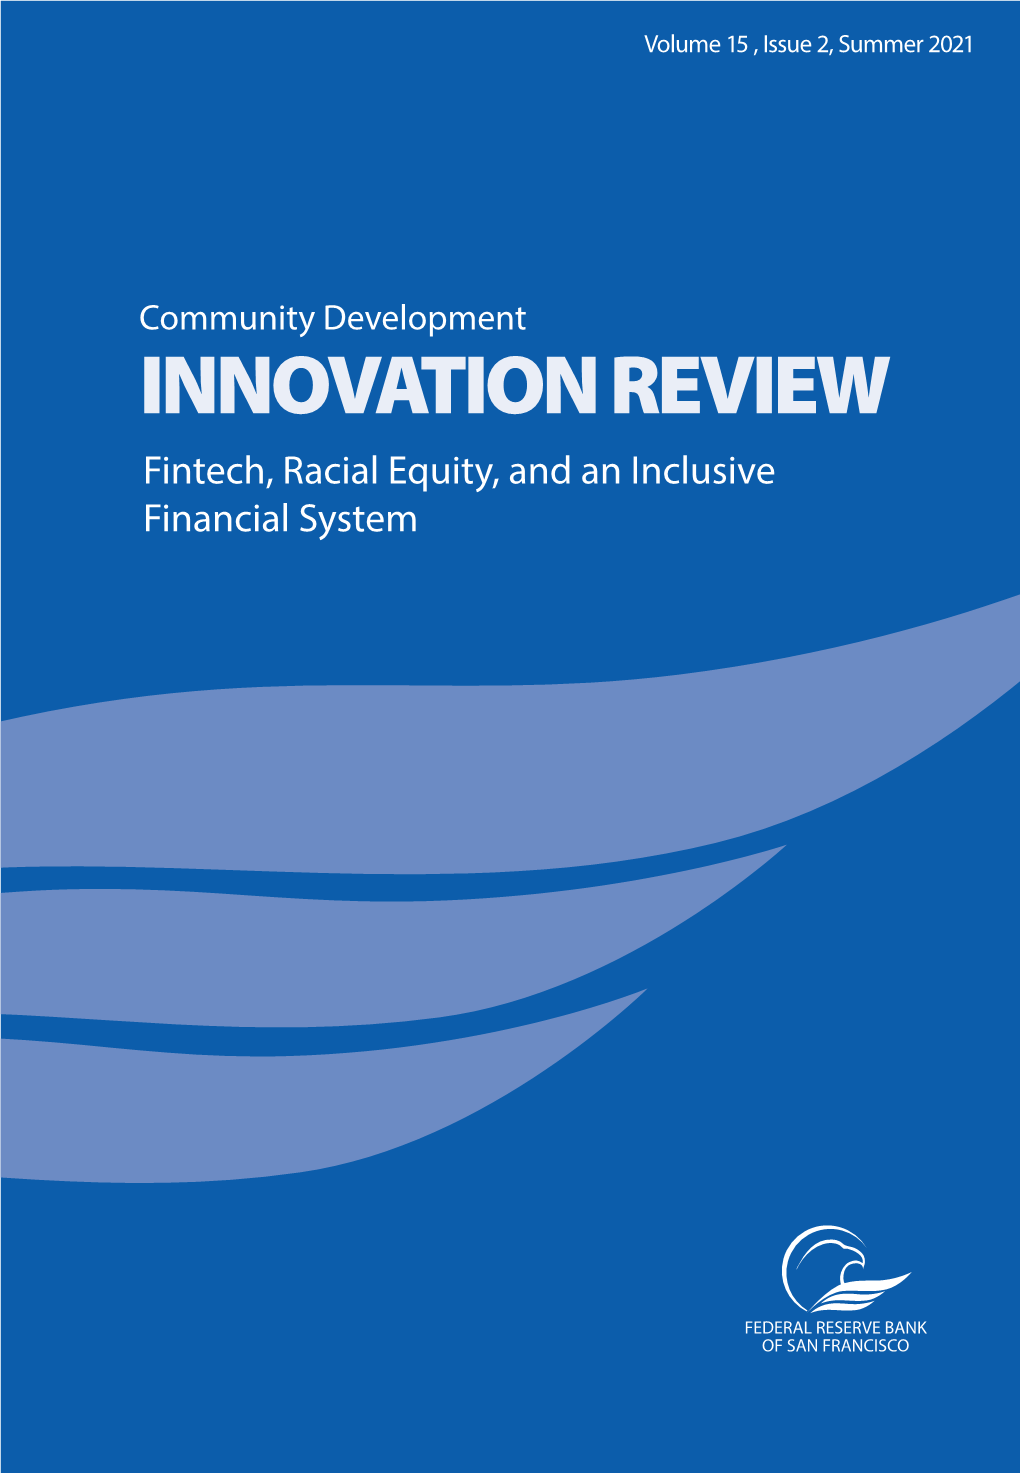 Fintech, Racial Equity, and an Inclusive Financial System